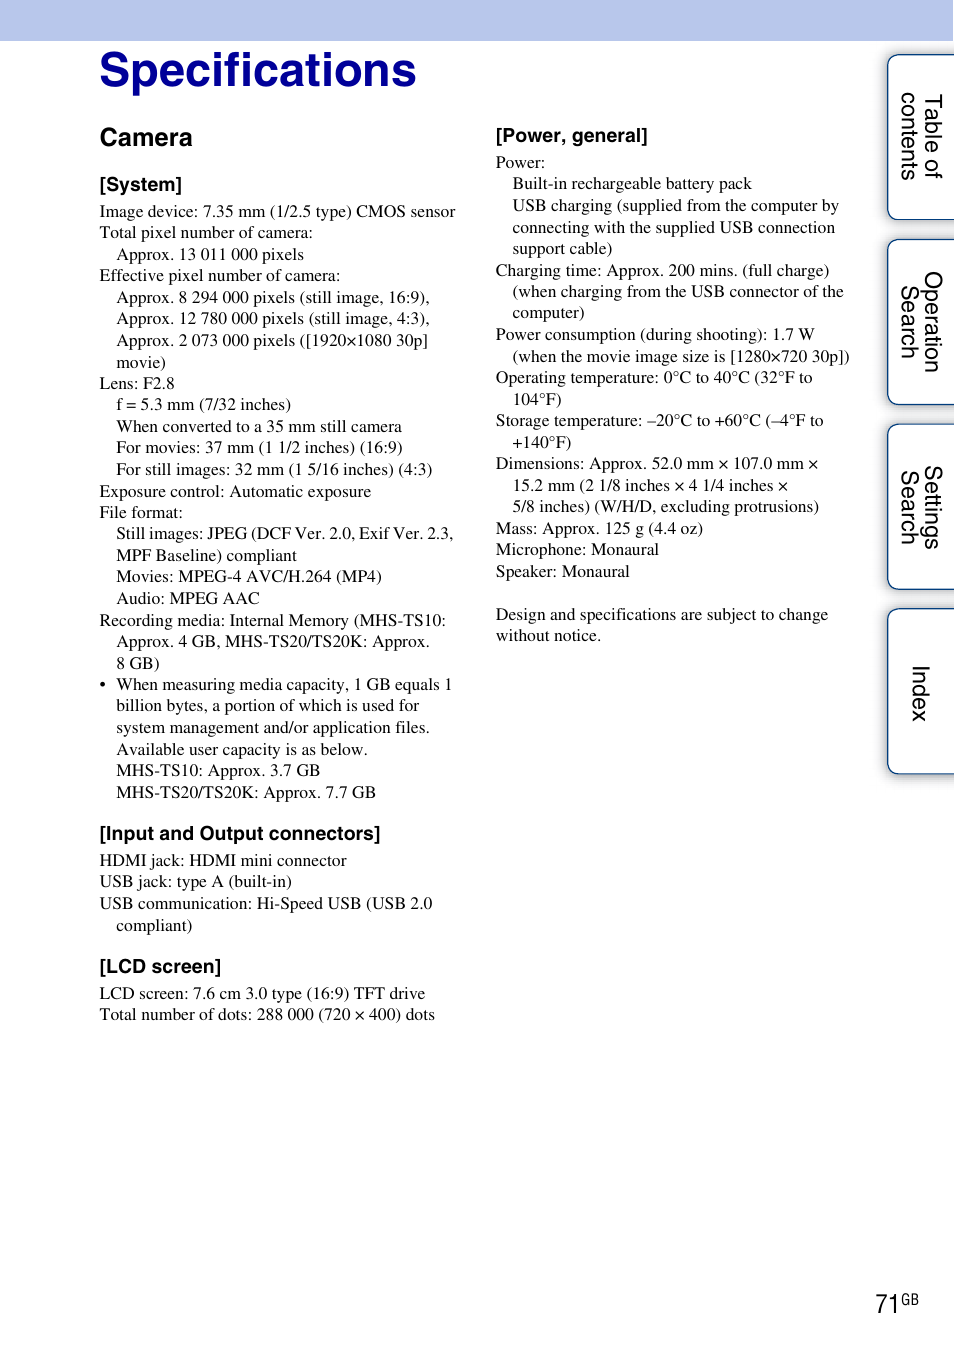 Specifications, Camera | Sony bloggie MHS-TS20К User Manual | Page 71 / 73